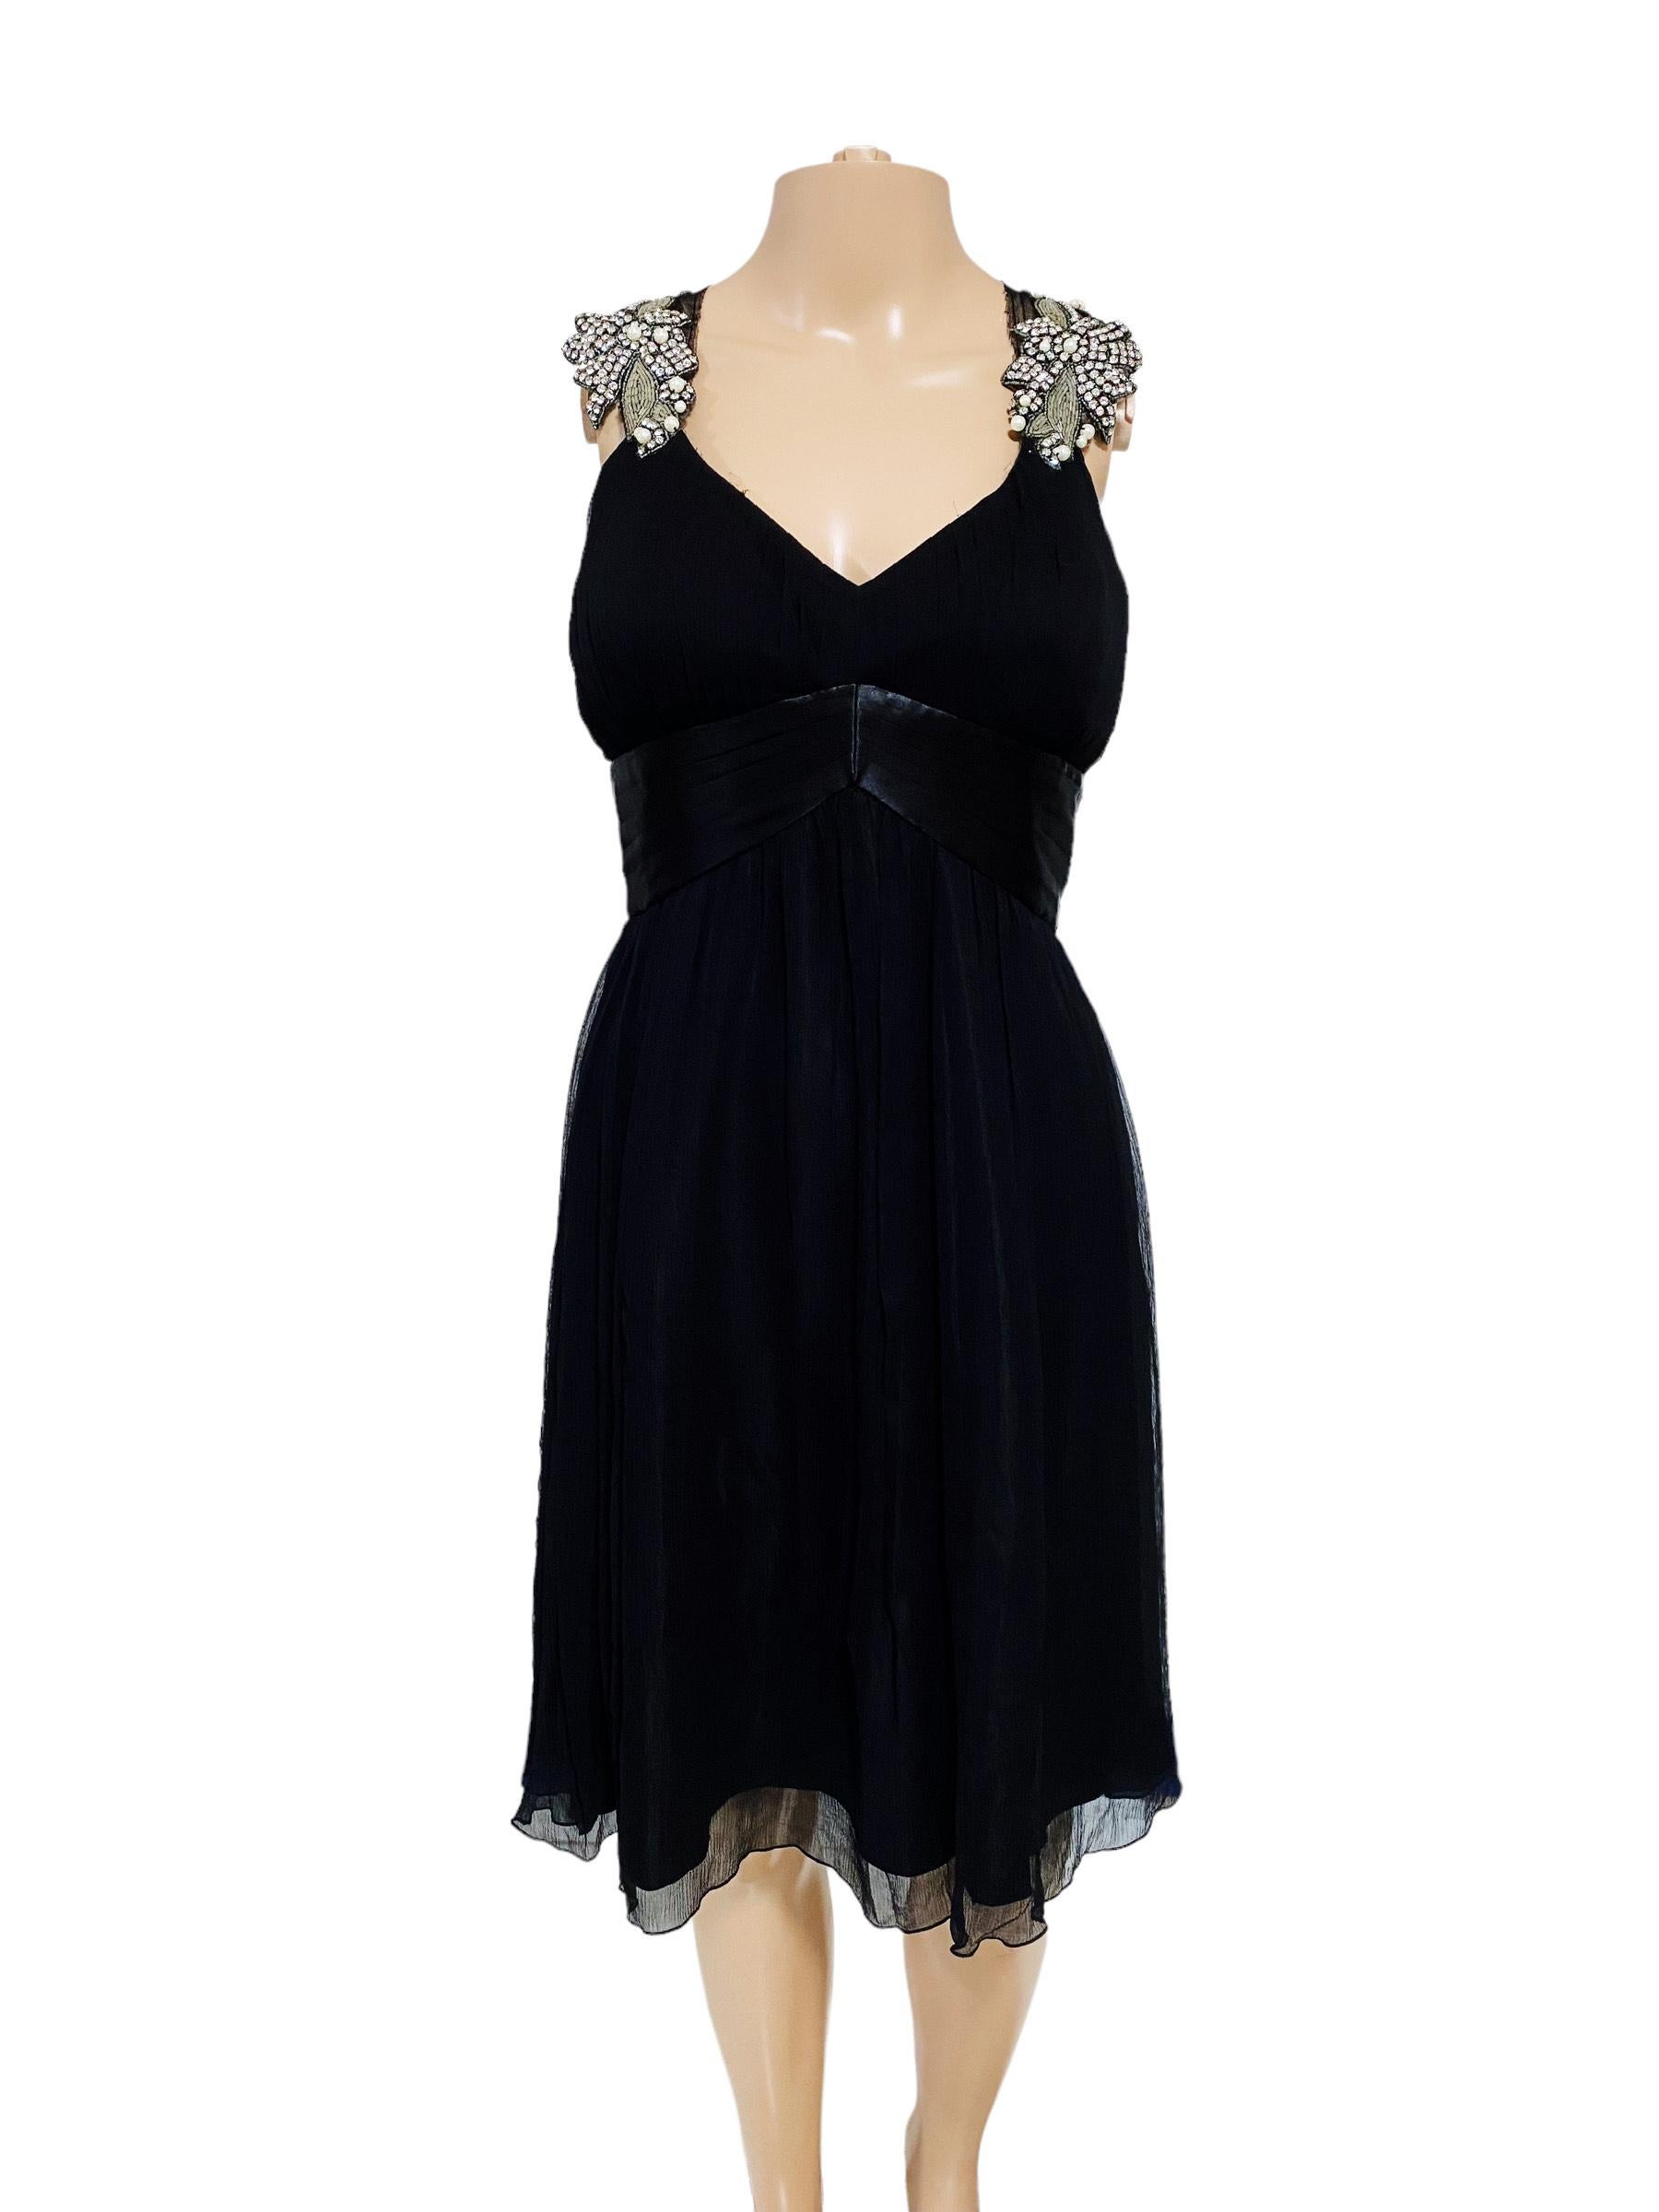 Vintage Blumarine sleeveless dress in black cotton blend with gorgeous crystals and metallic rhinestones detailing embellishments on the shoulders and back with a tulle/silk cloth. Rare and hard to find these days.

Very Iconic and very BLUMARINE.